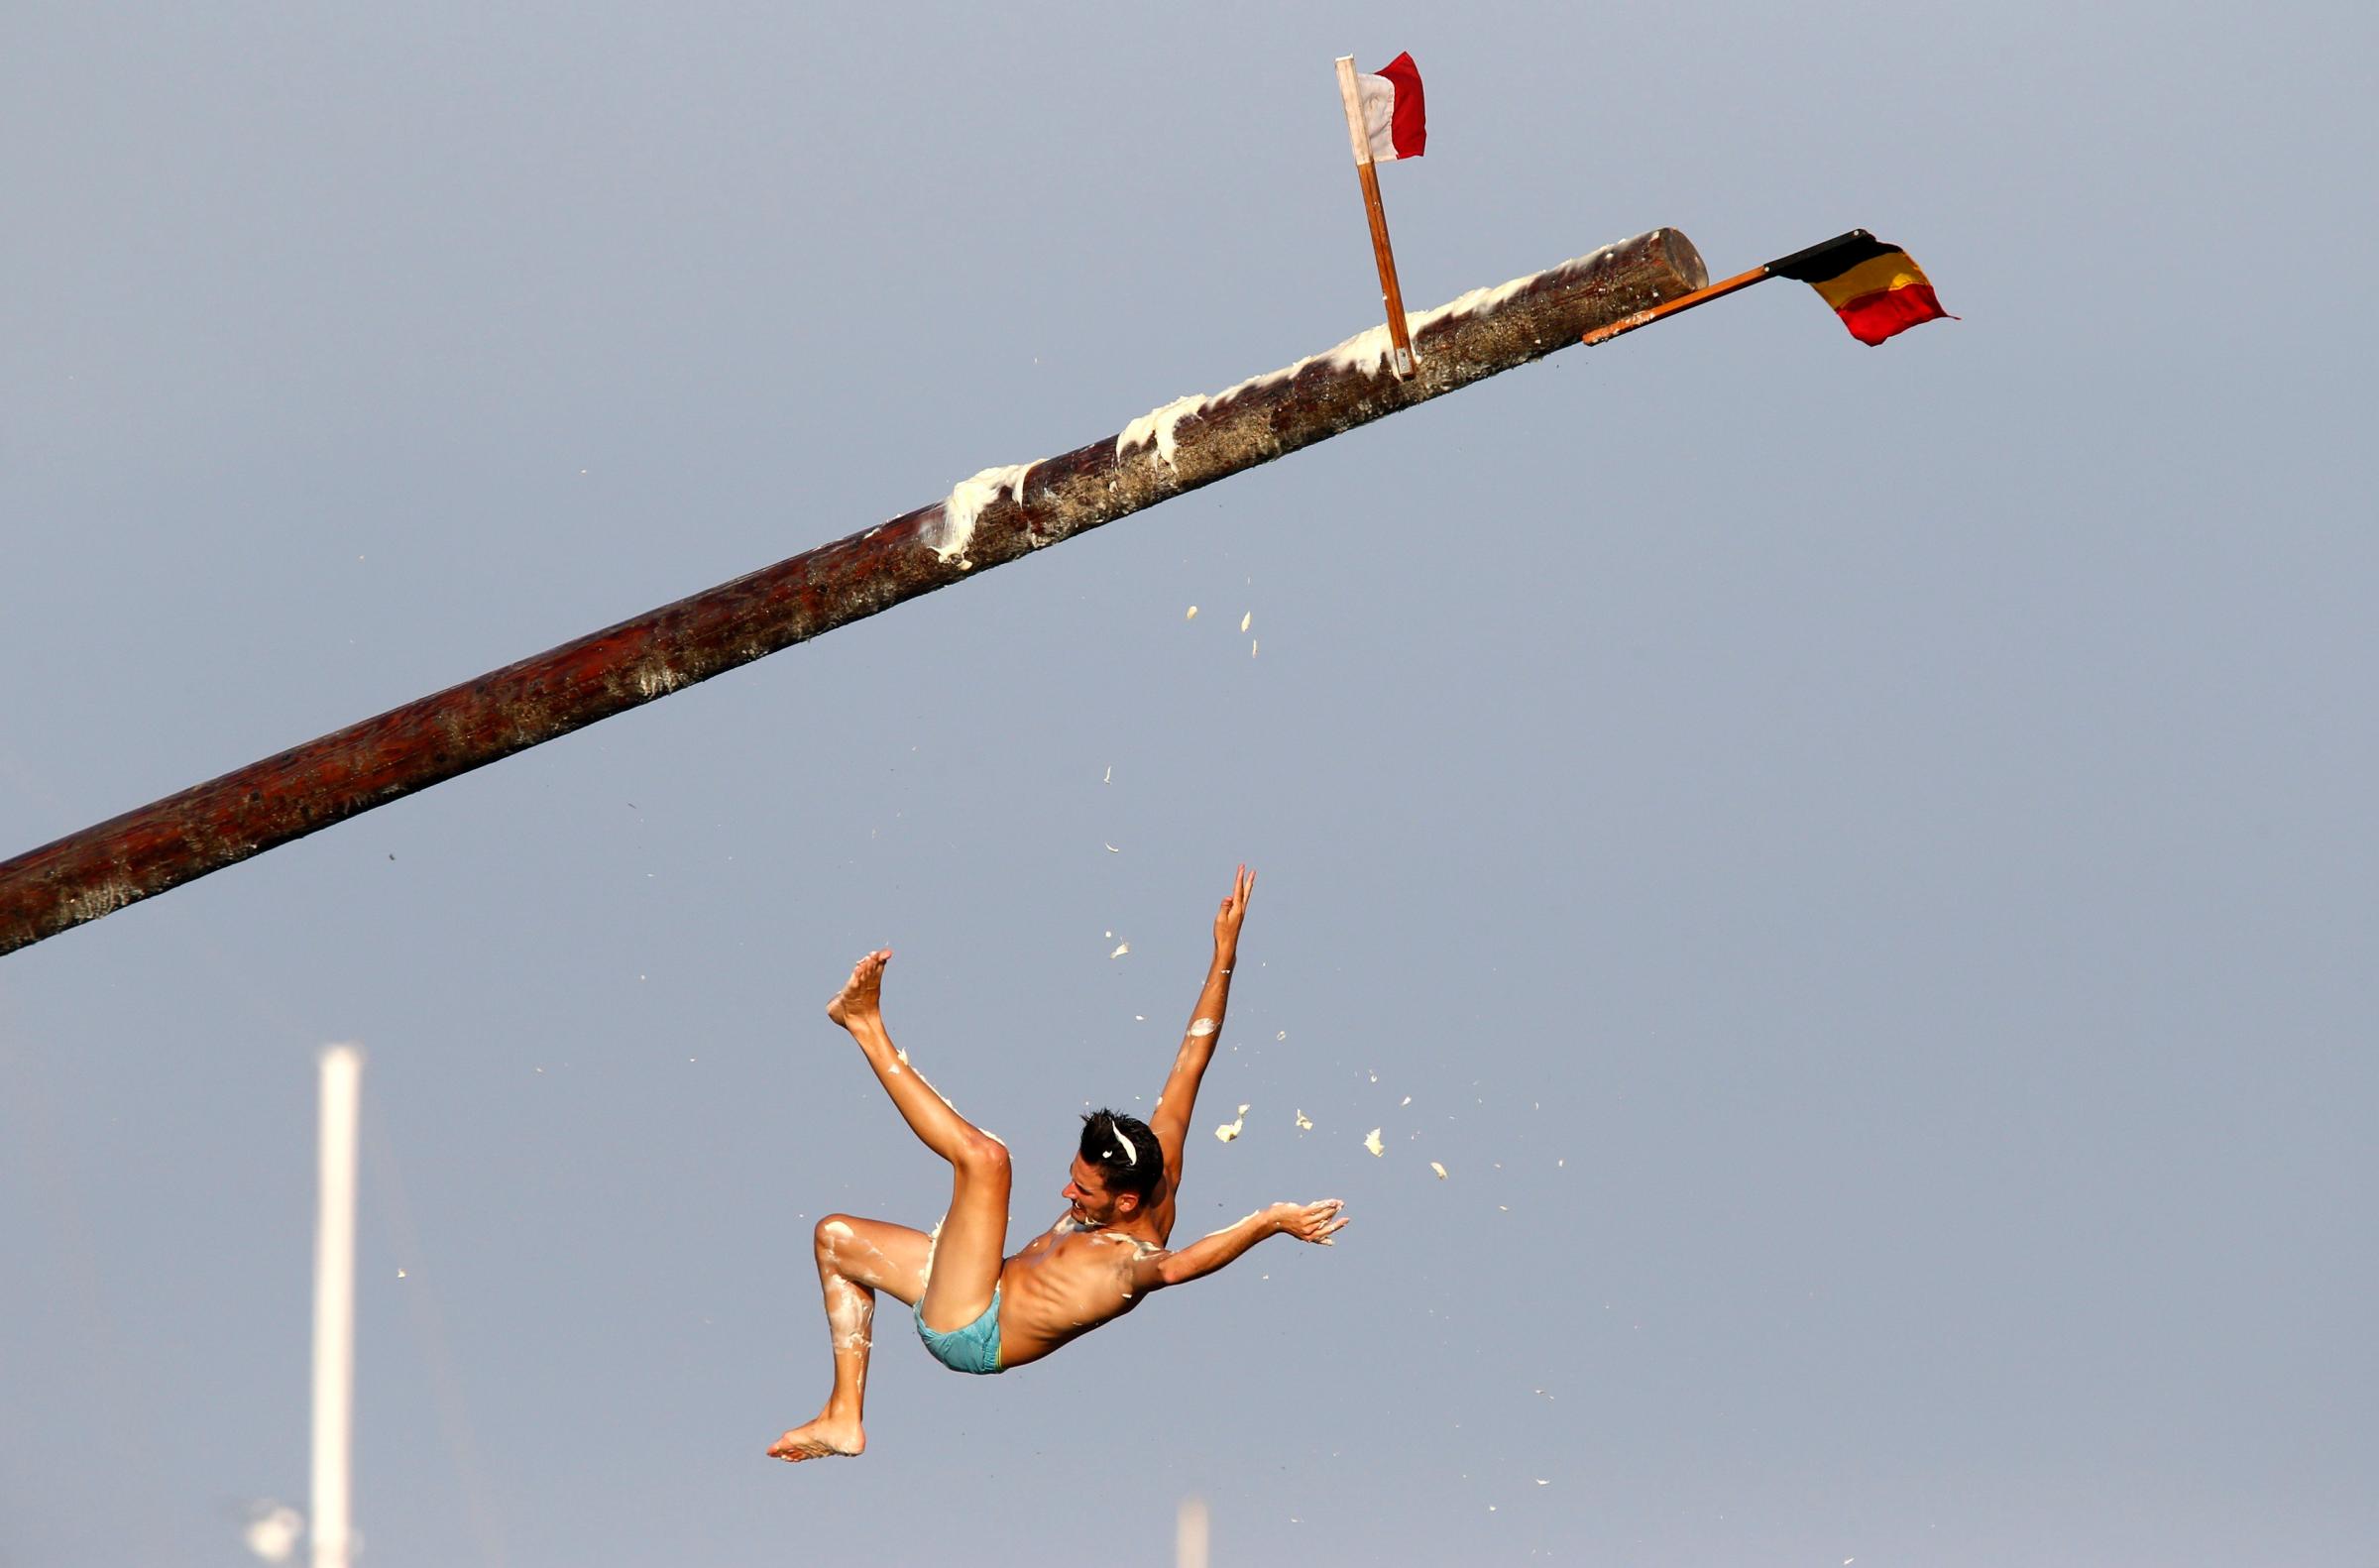 A man falls off the "gostra", a pole covered in grease, during the celebrations for the religious feast of St Julian, patron of the town of St Julian's, outside Valletta on Aug. 31, 2014.